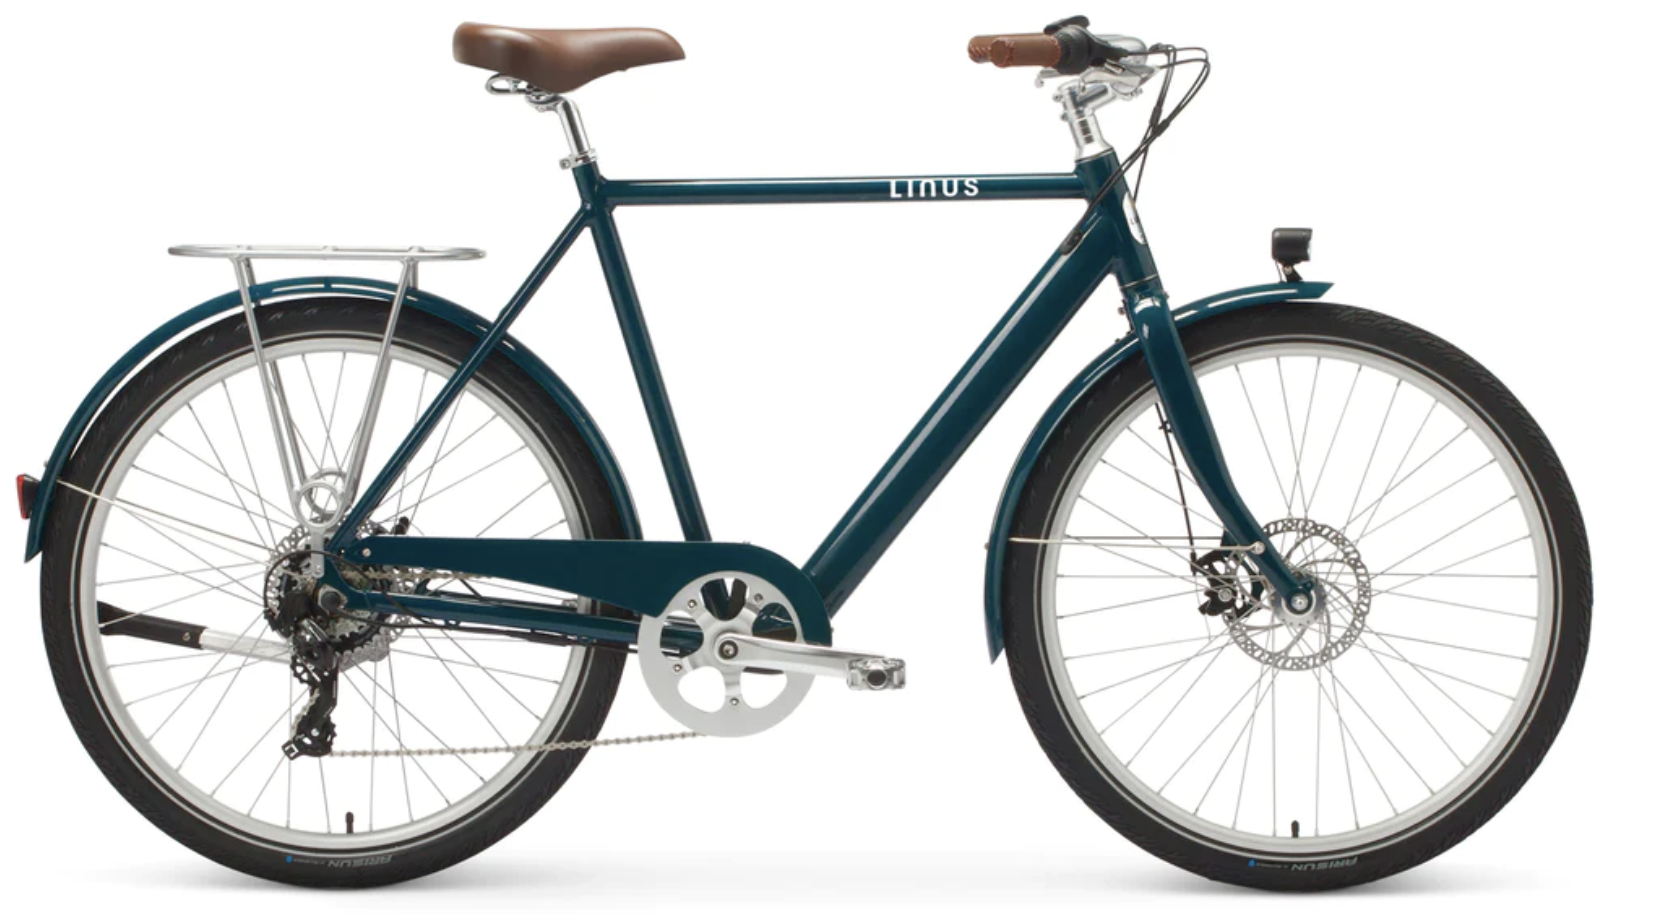 A blue bicycle is shown against a white background.